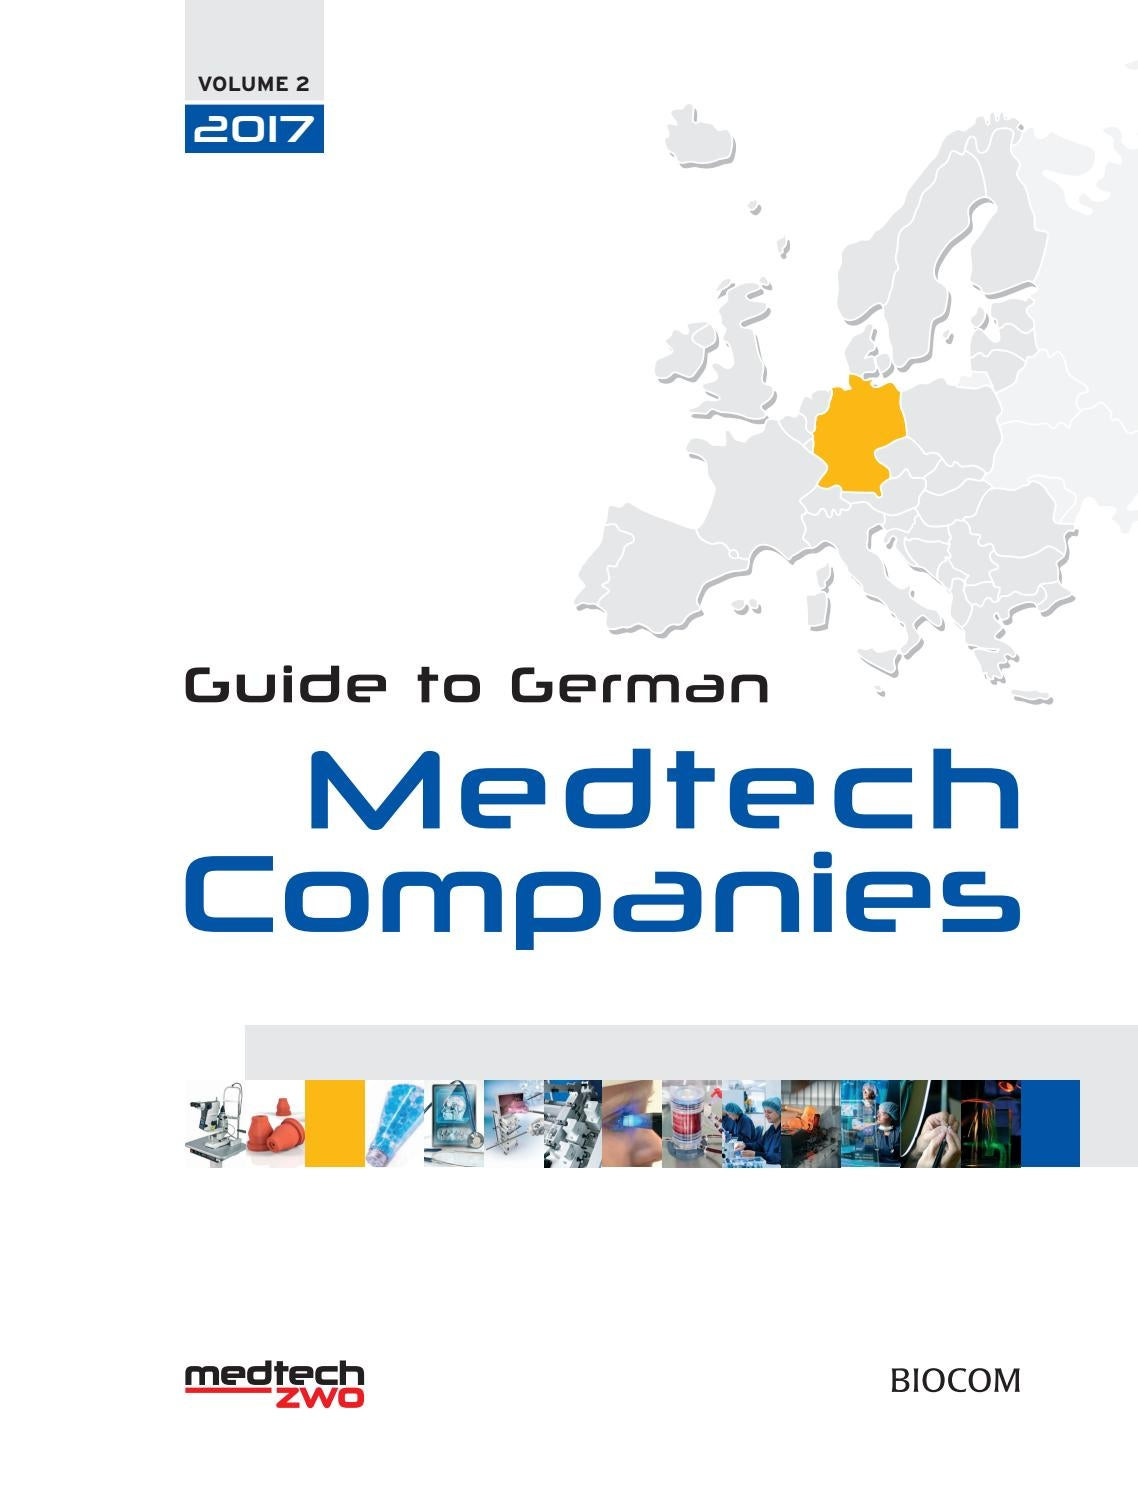 Allergan Master Distributor Quality Management Systems Sample Resumes Guide to German Medtech Companies 2017 by Biocom Ag – issuu